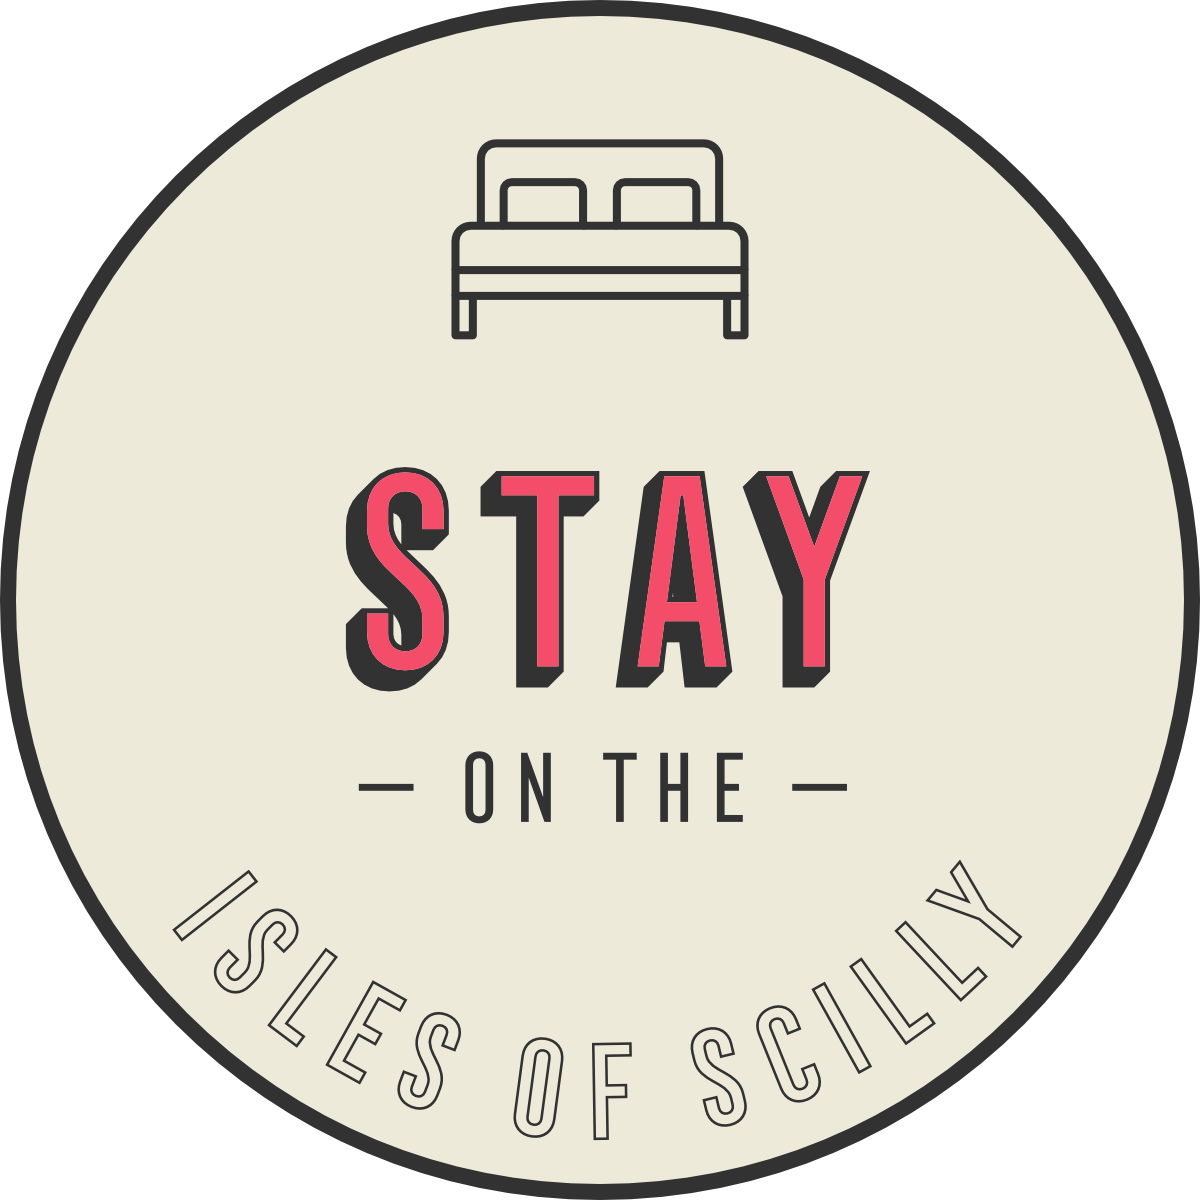 Stay on the Isles of Scilly